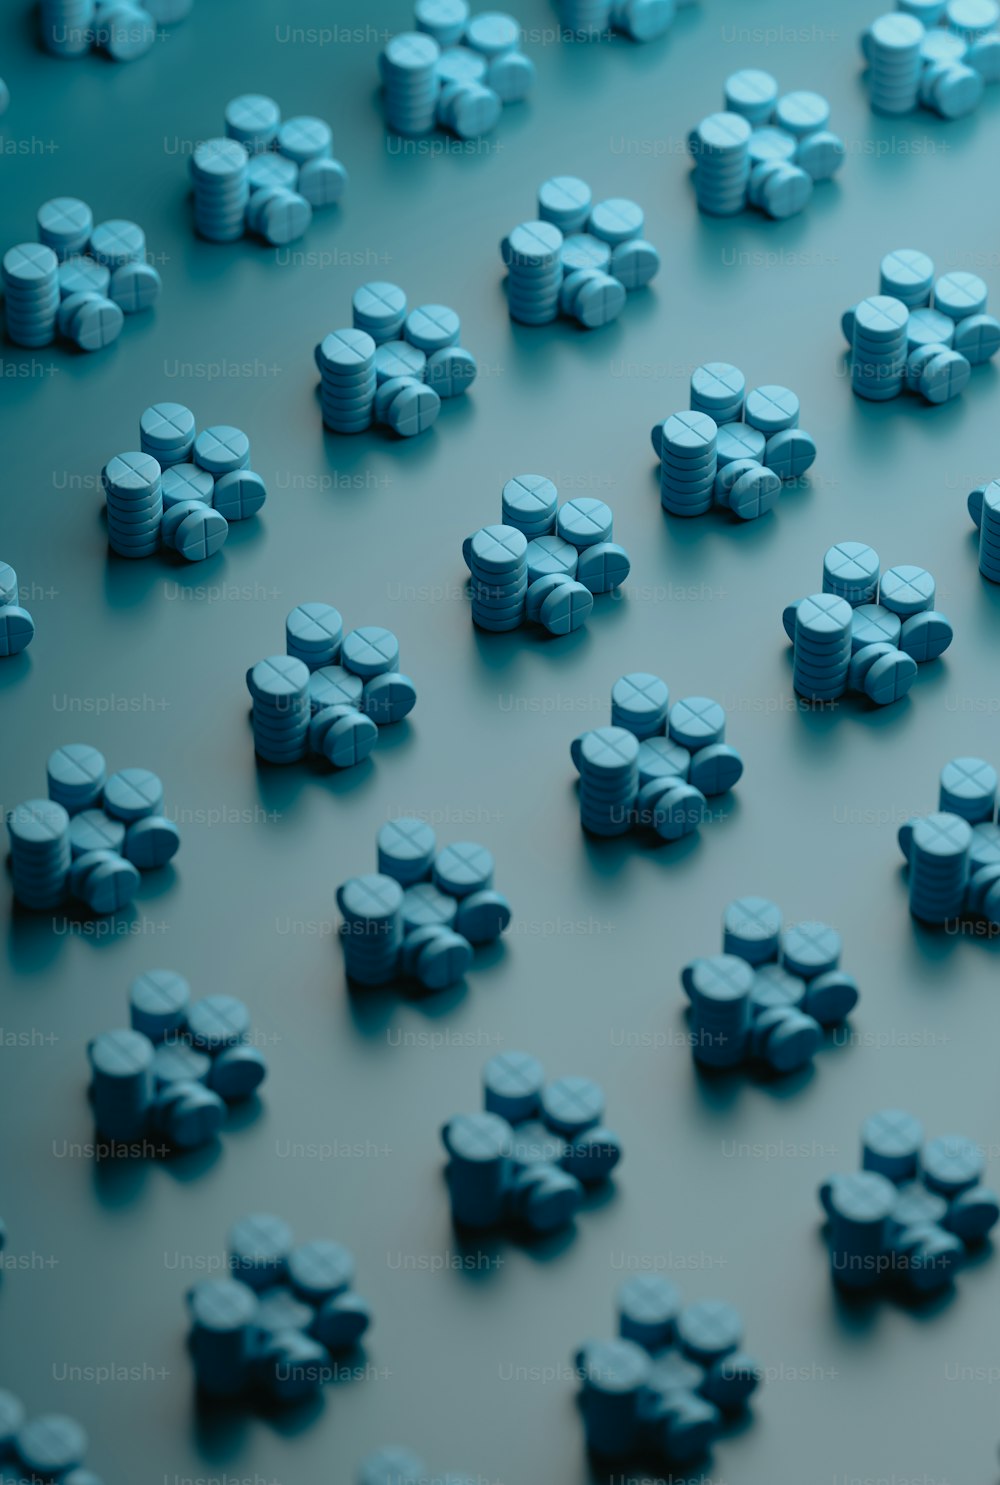 a large group of small blue objects on a table